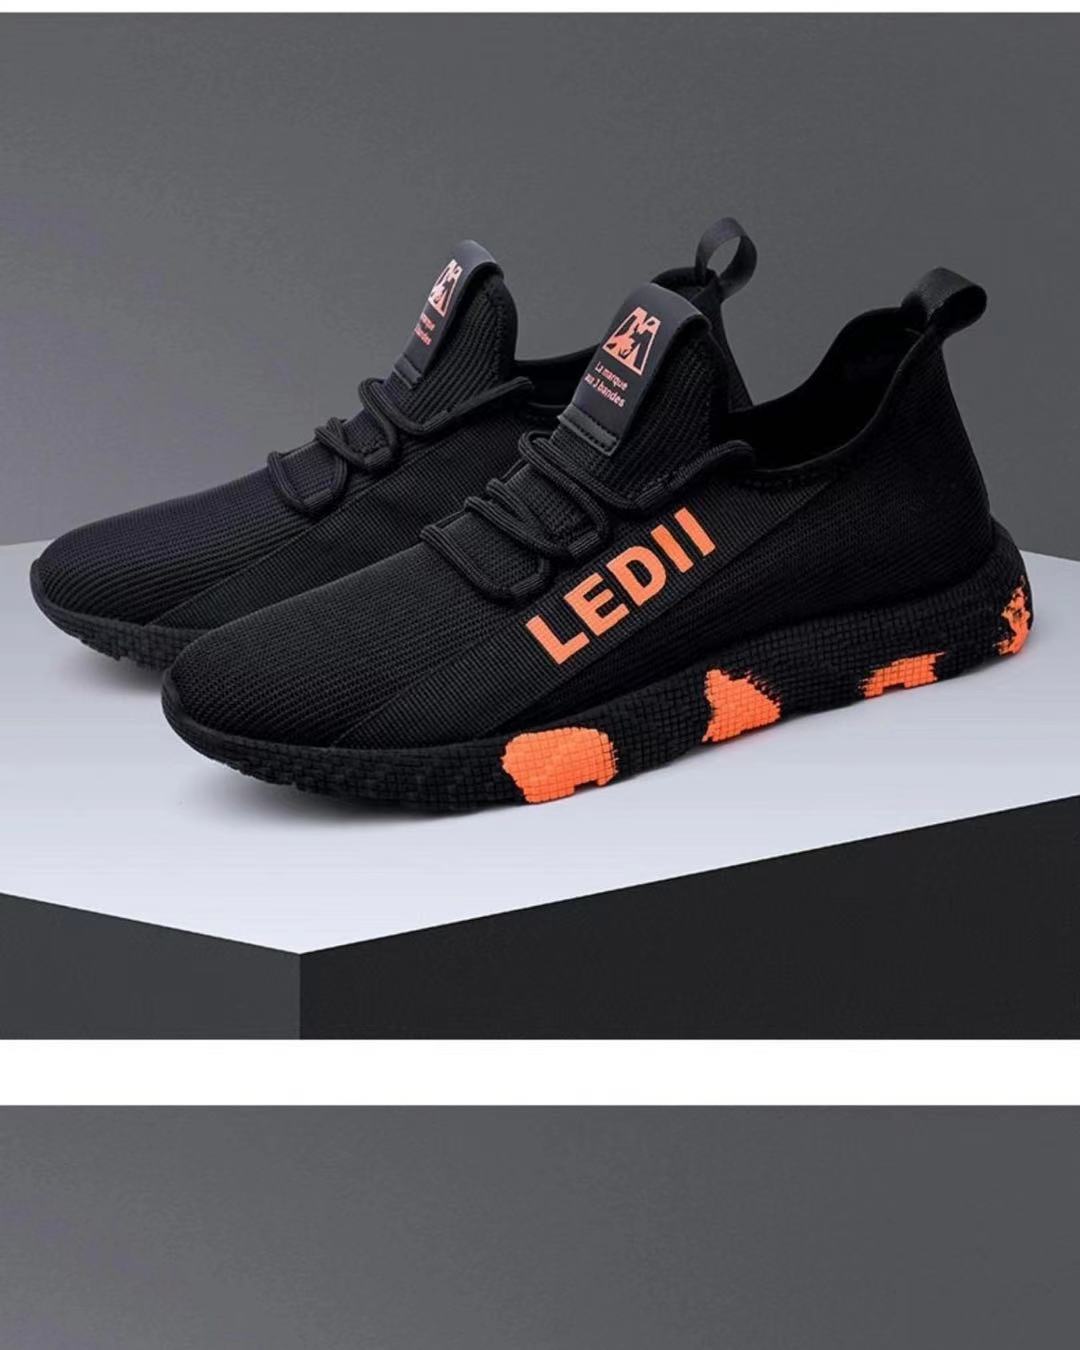 Men's Shoes 2021 New Spring/ Summer /Trend Shoes Sports Breathable Running Work Shoes